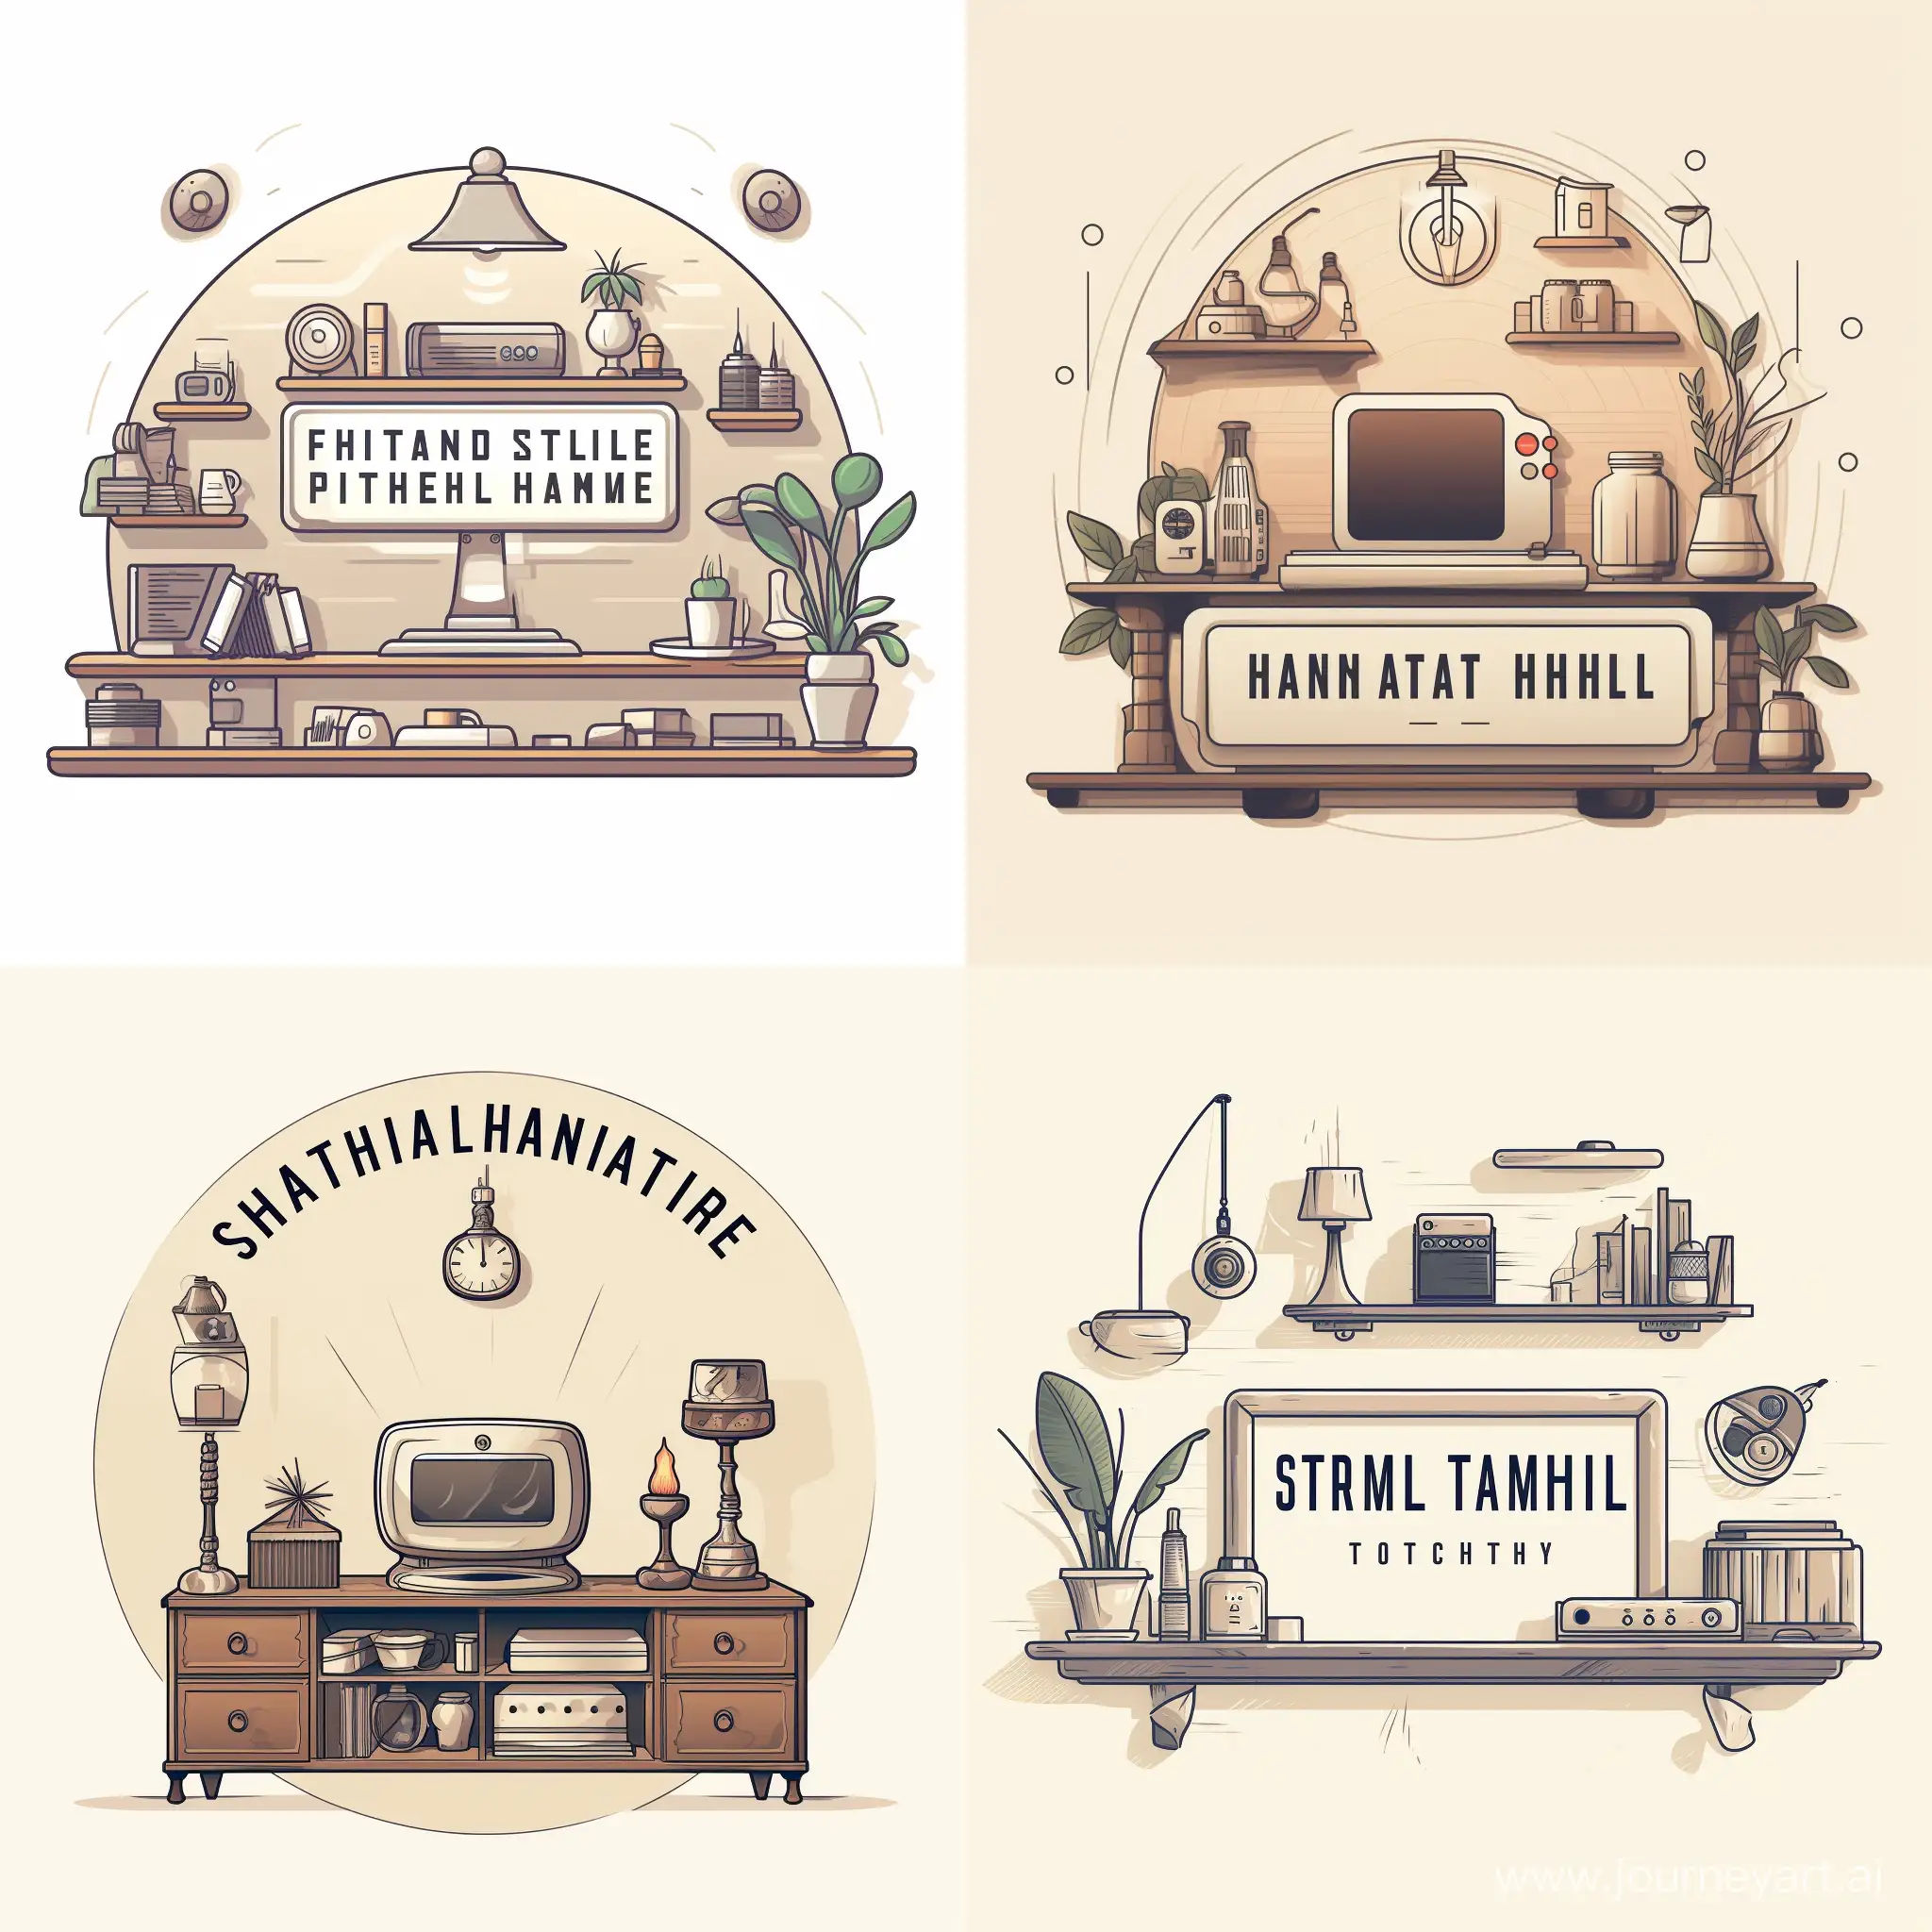 Logo for YouTube channel about technology and smart home in vintage style. Include: Electronic board, laptop, light switch, WiFi router. Make it light colors, mostly white and beige.